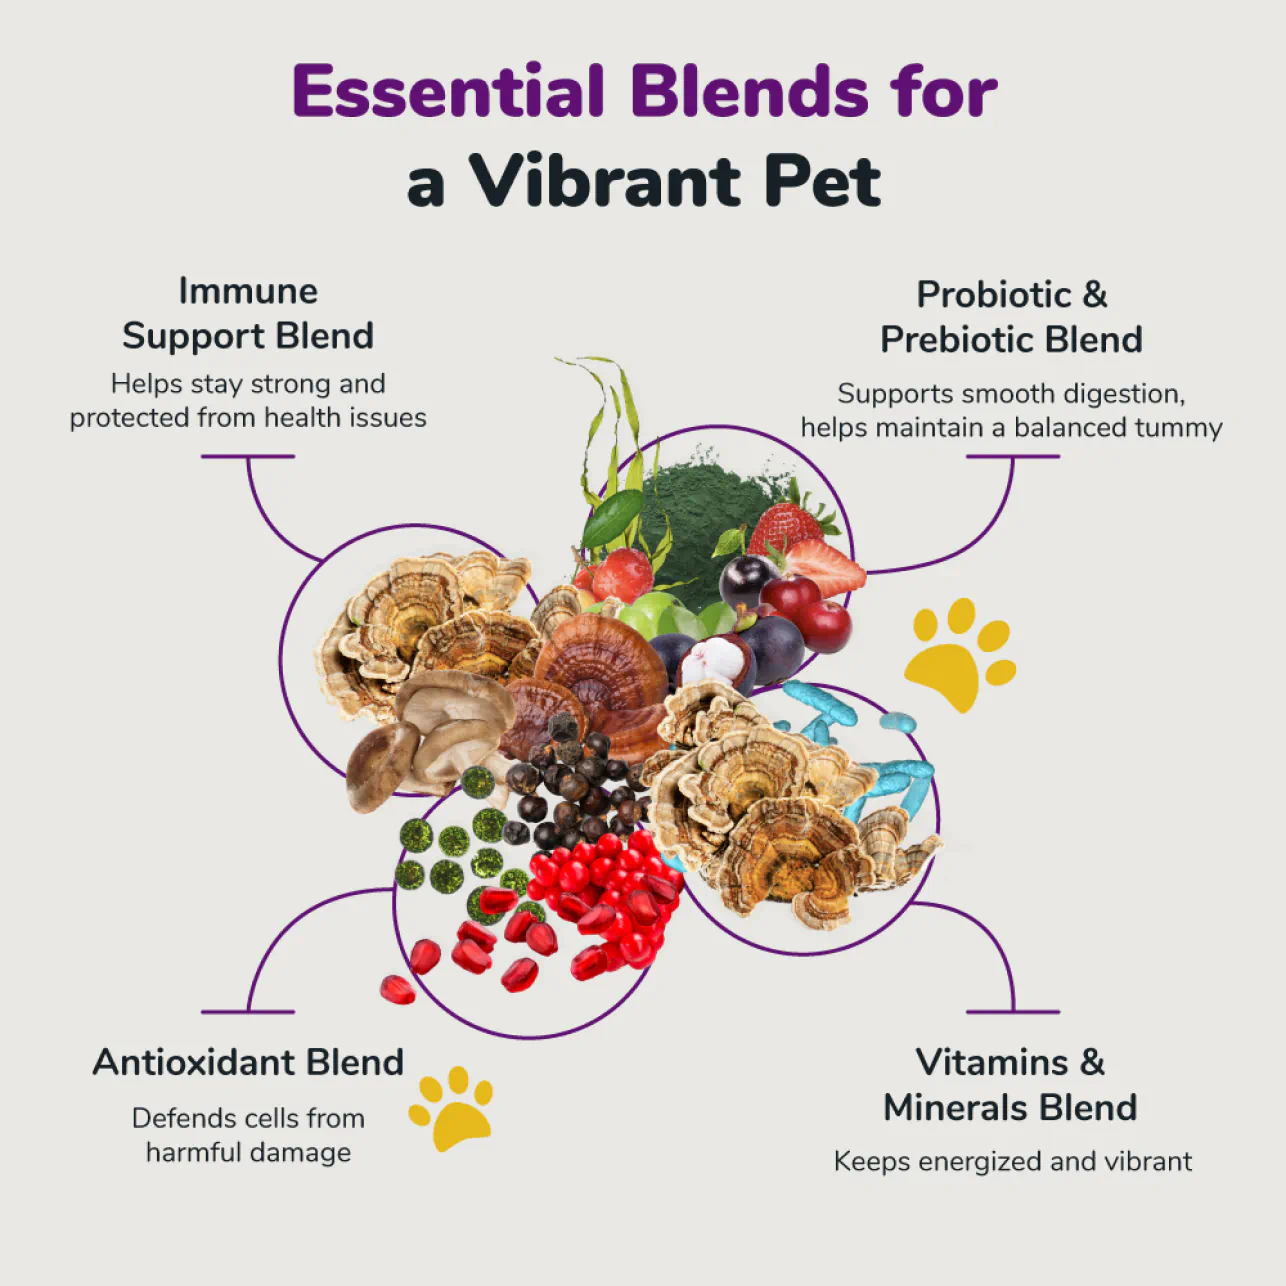 An infographic with images and descriptions of various blends for pet health